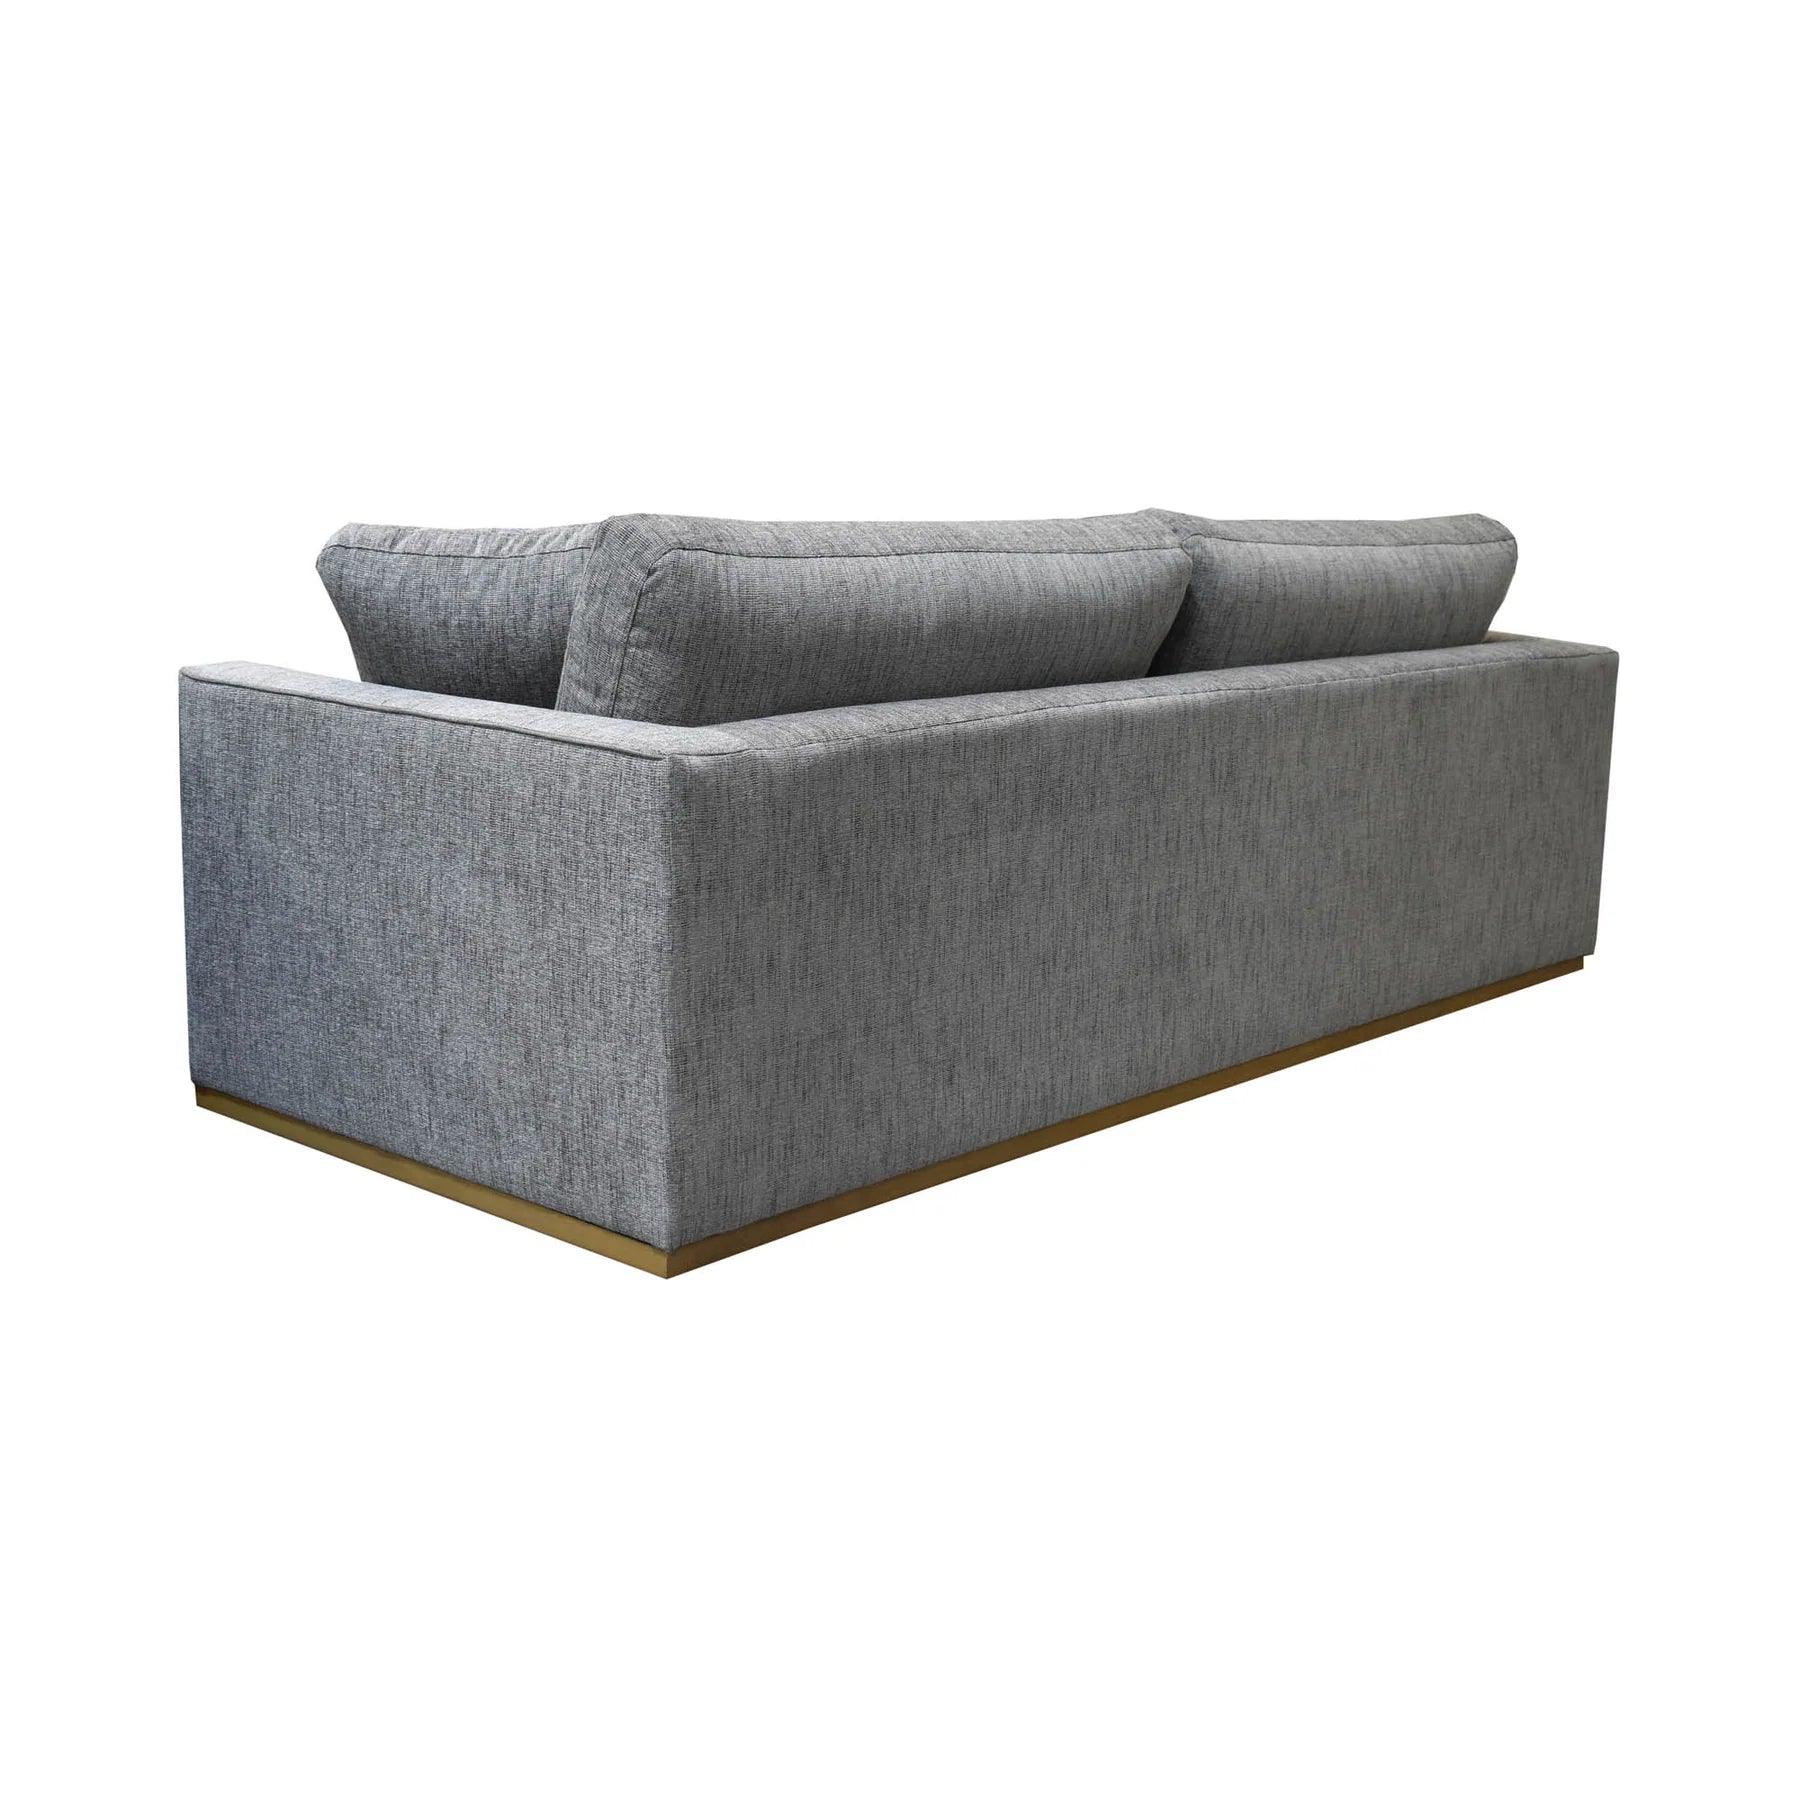 ANDERSON Woven Charcoal Sofa - Northern Interiors